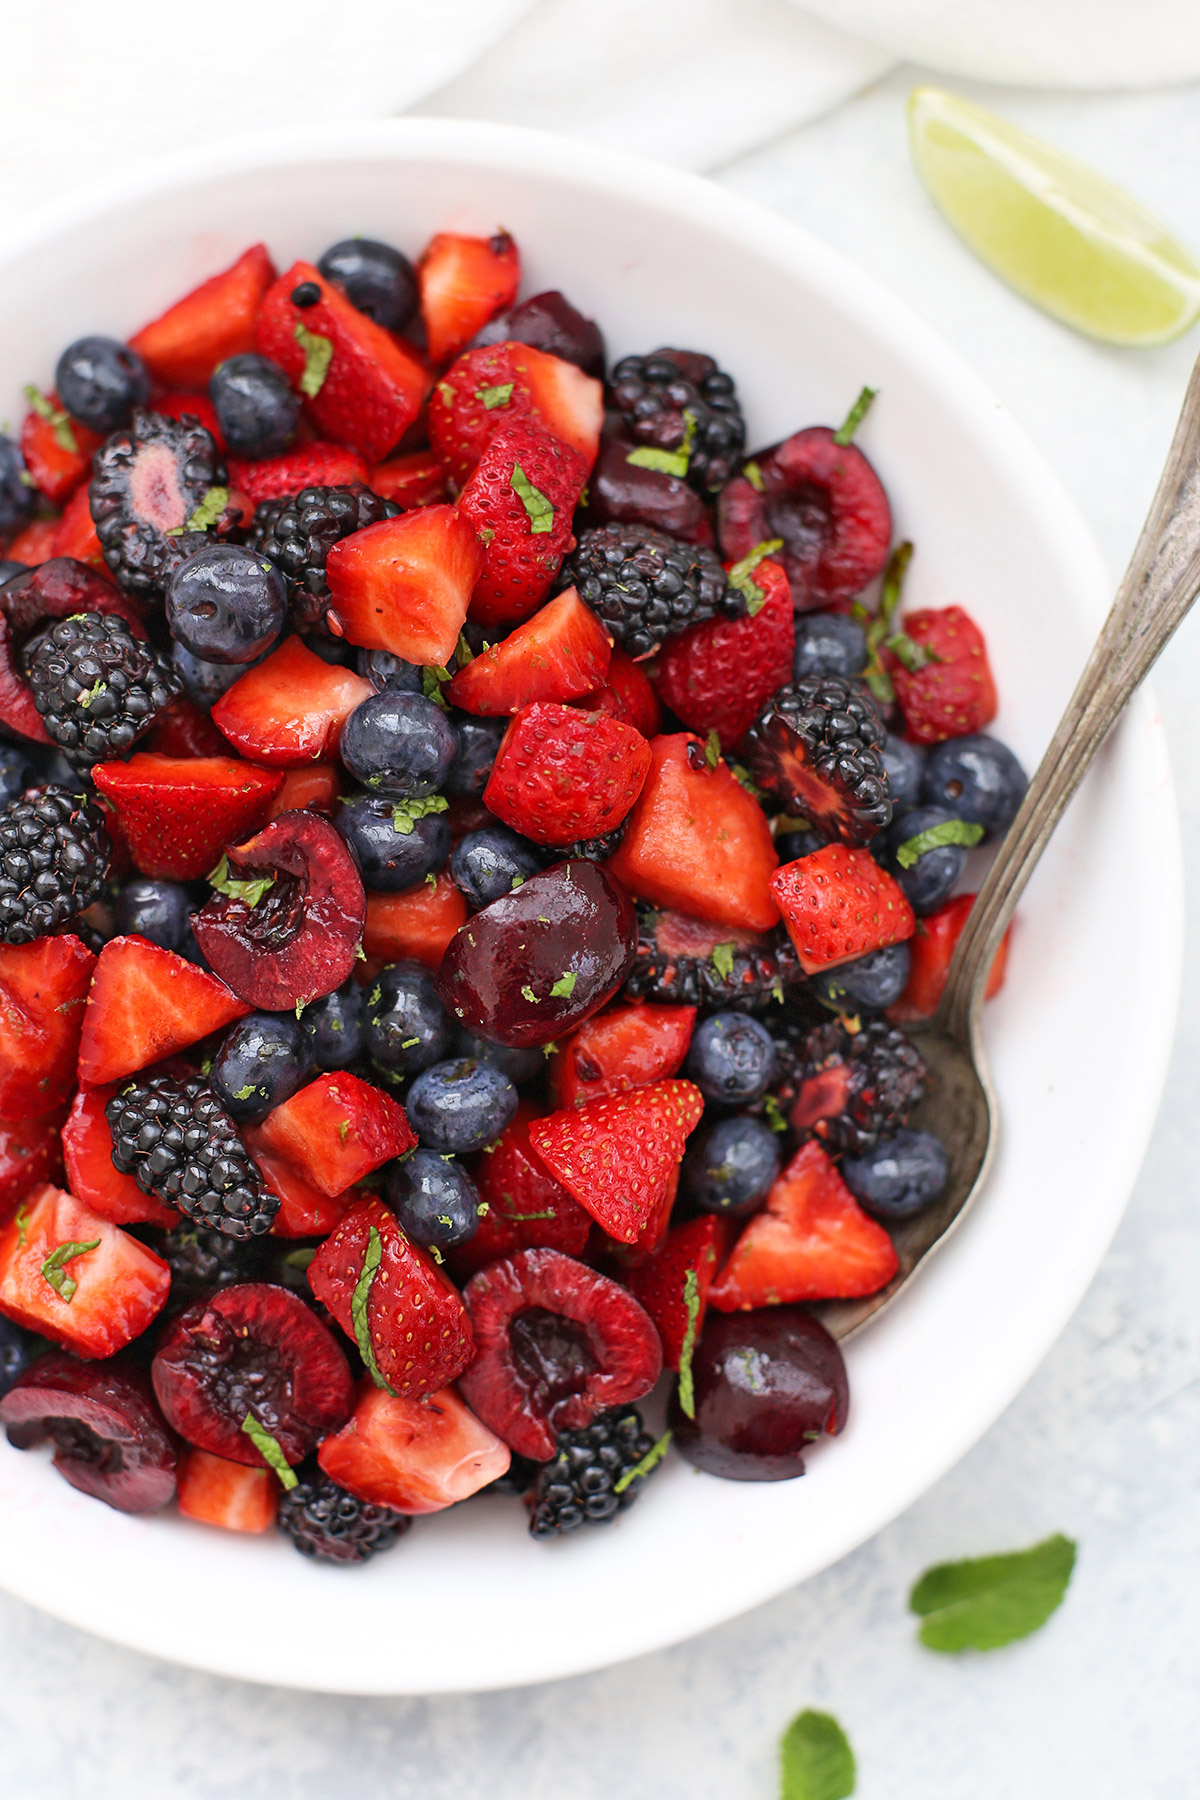 Cherry Berry Fruit Salad with Lime Mint Dressing - Strawberries, blackberries, blueberries, and cherries with lime mint dressing. 